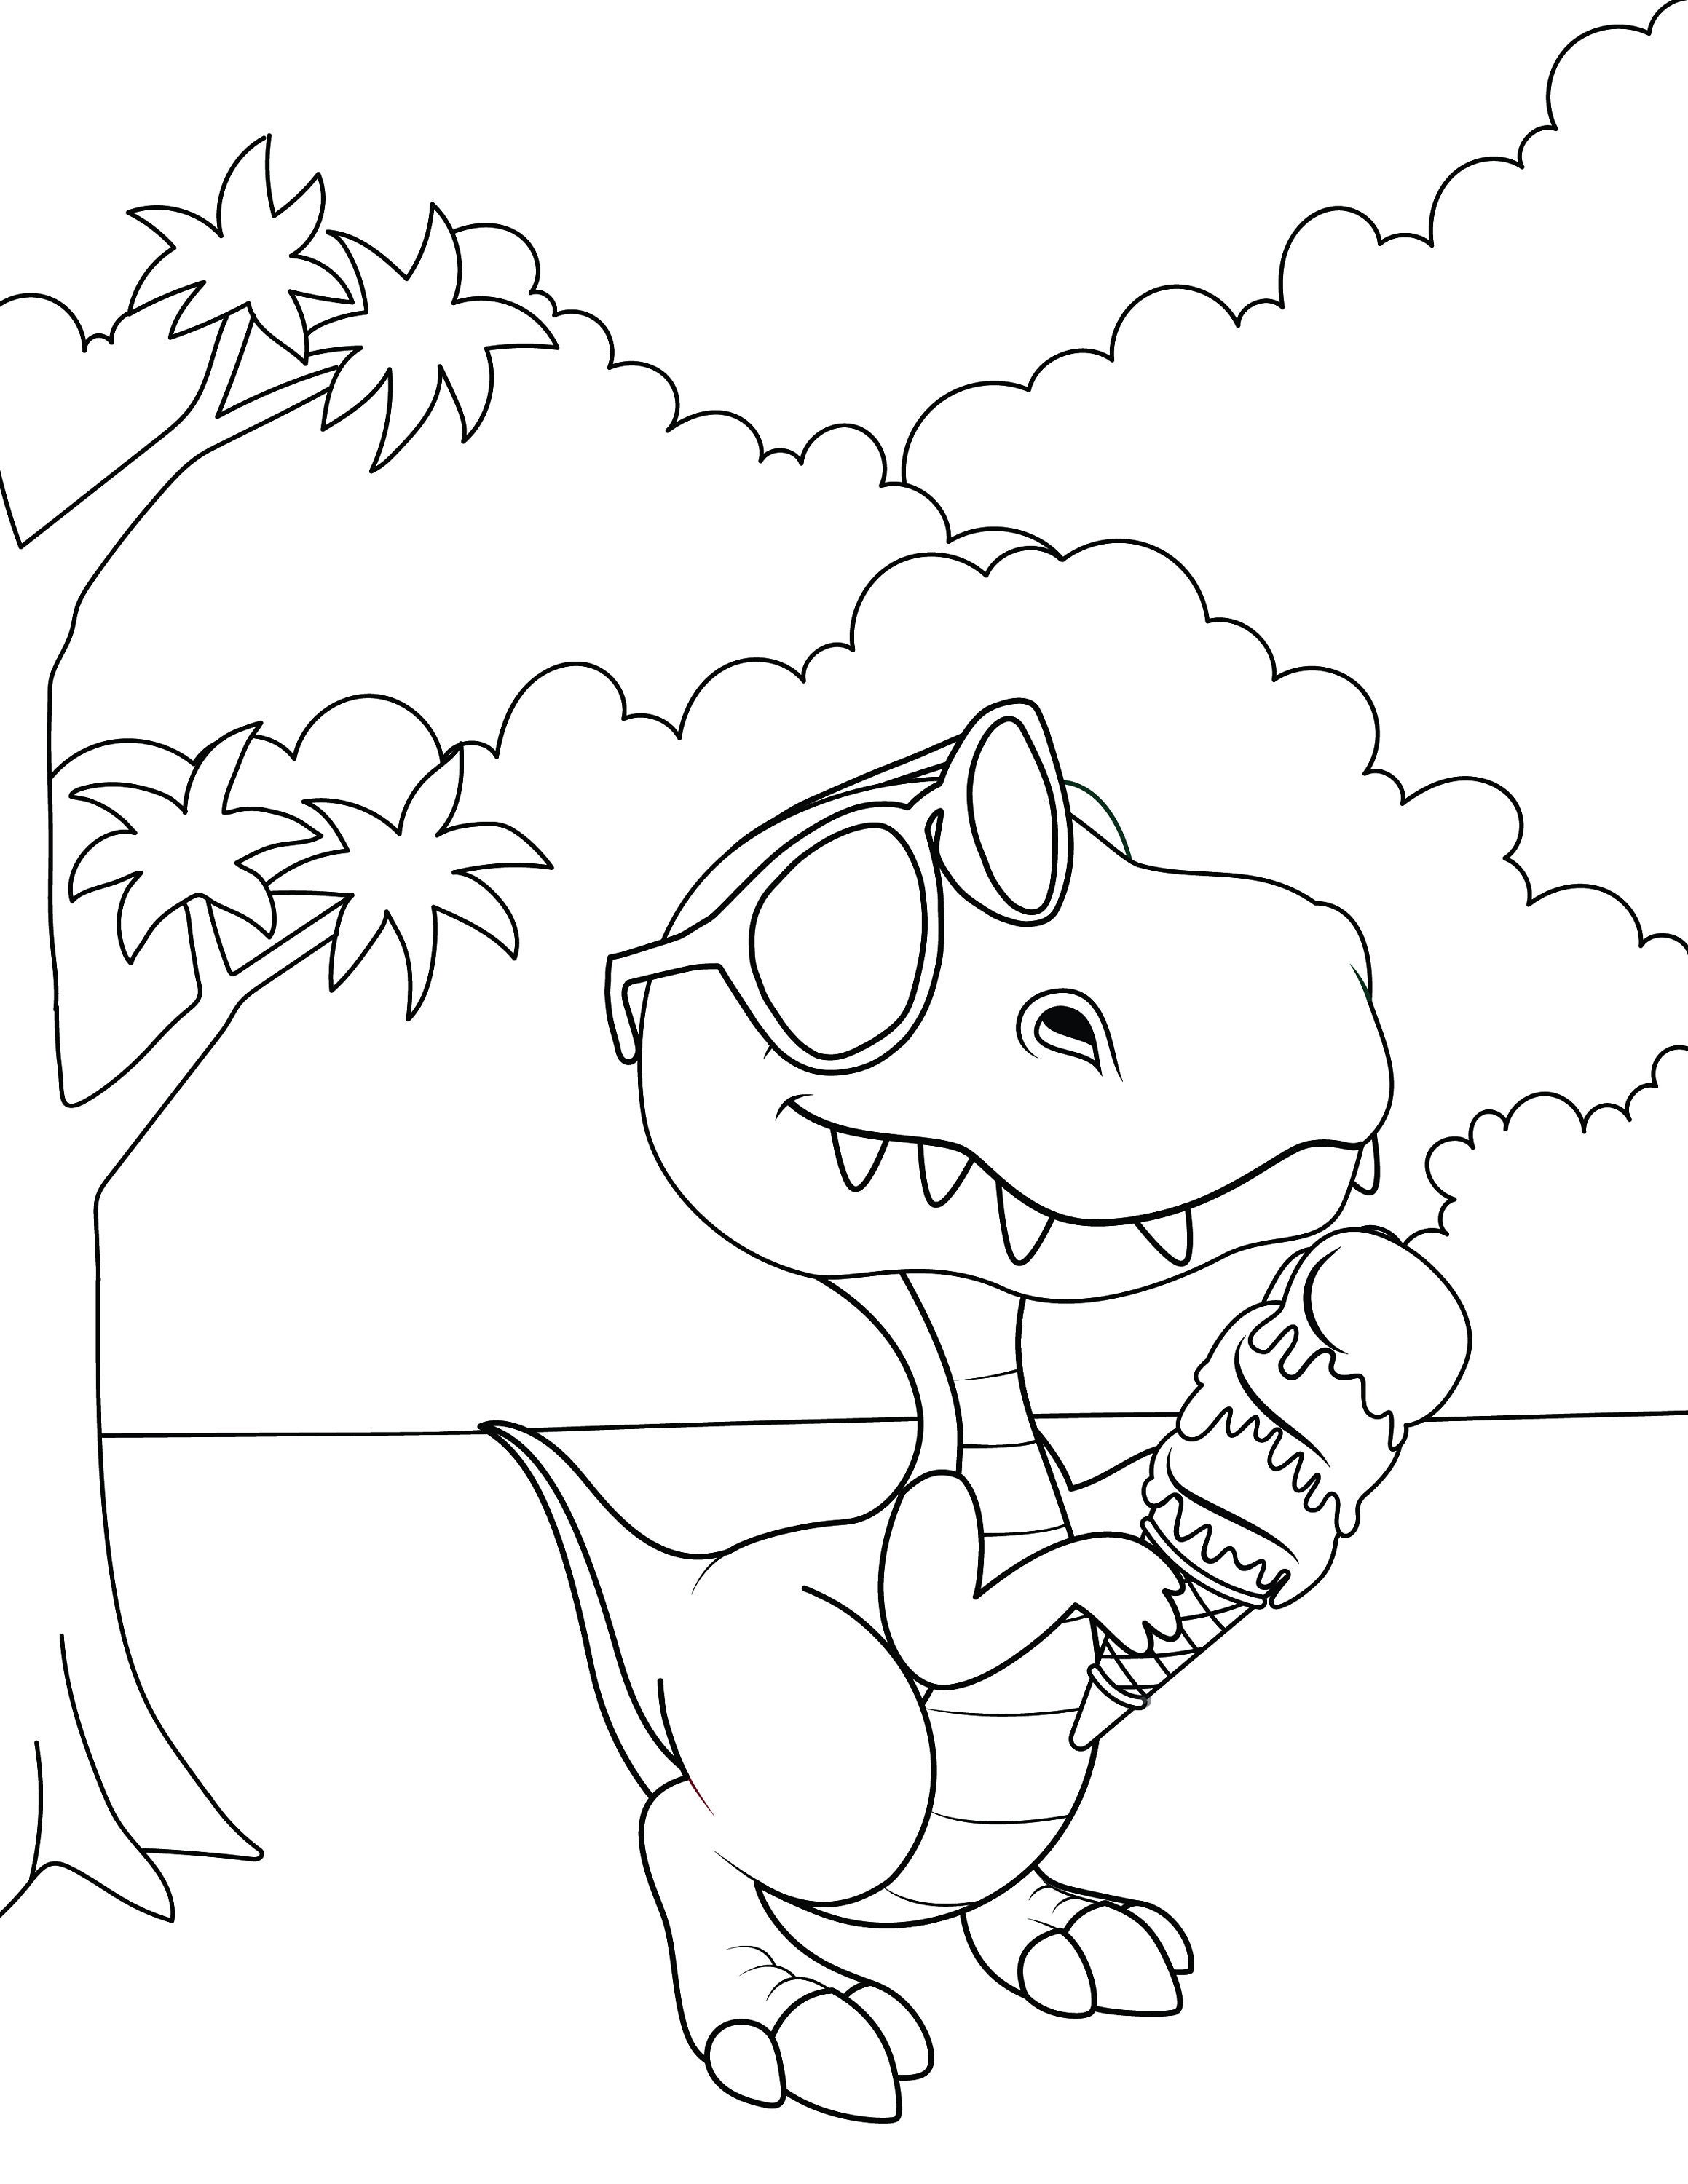 Dinosaur Coloring Pages Eating Ice Cream 4 Digital Coloring - Etsy